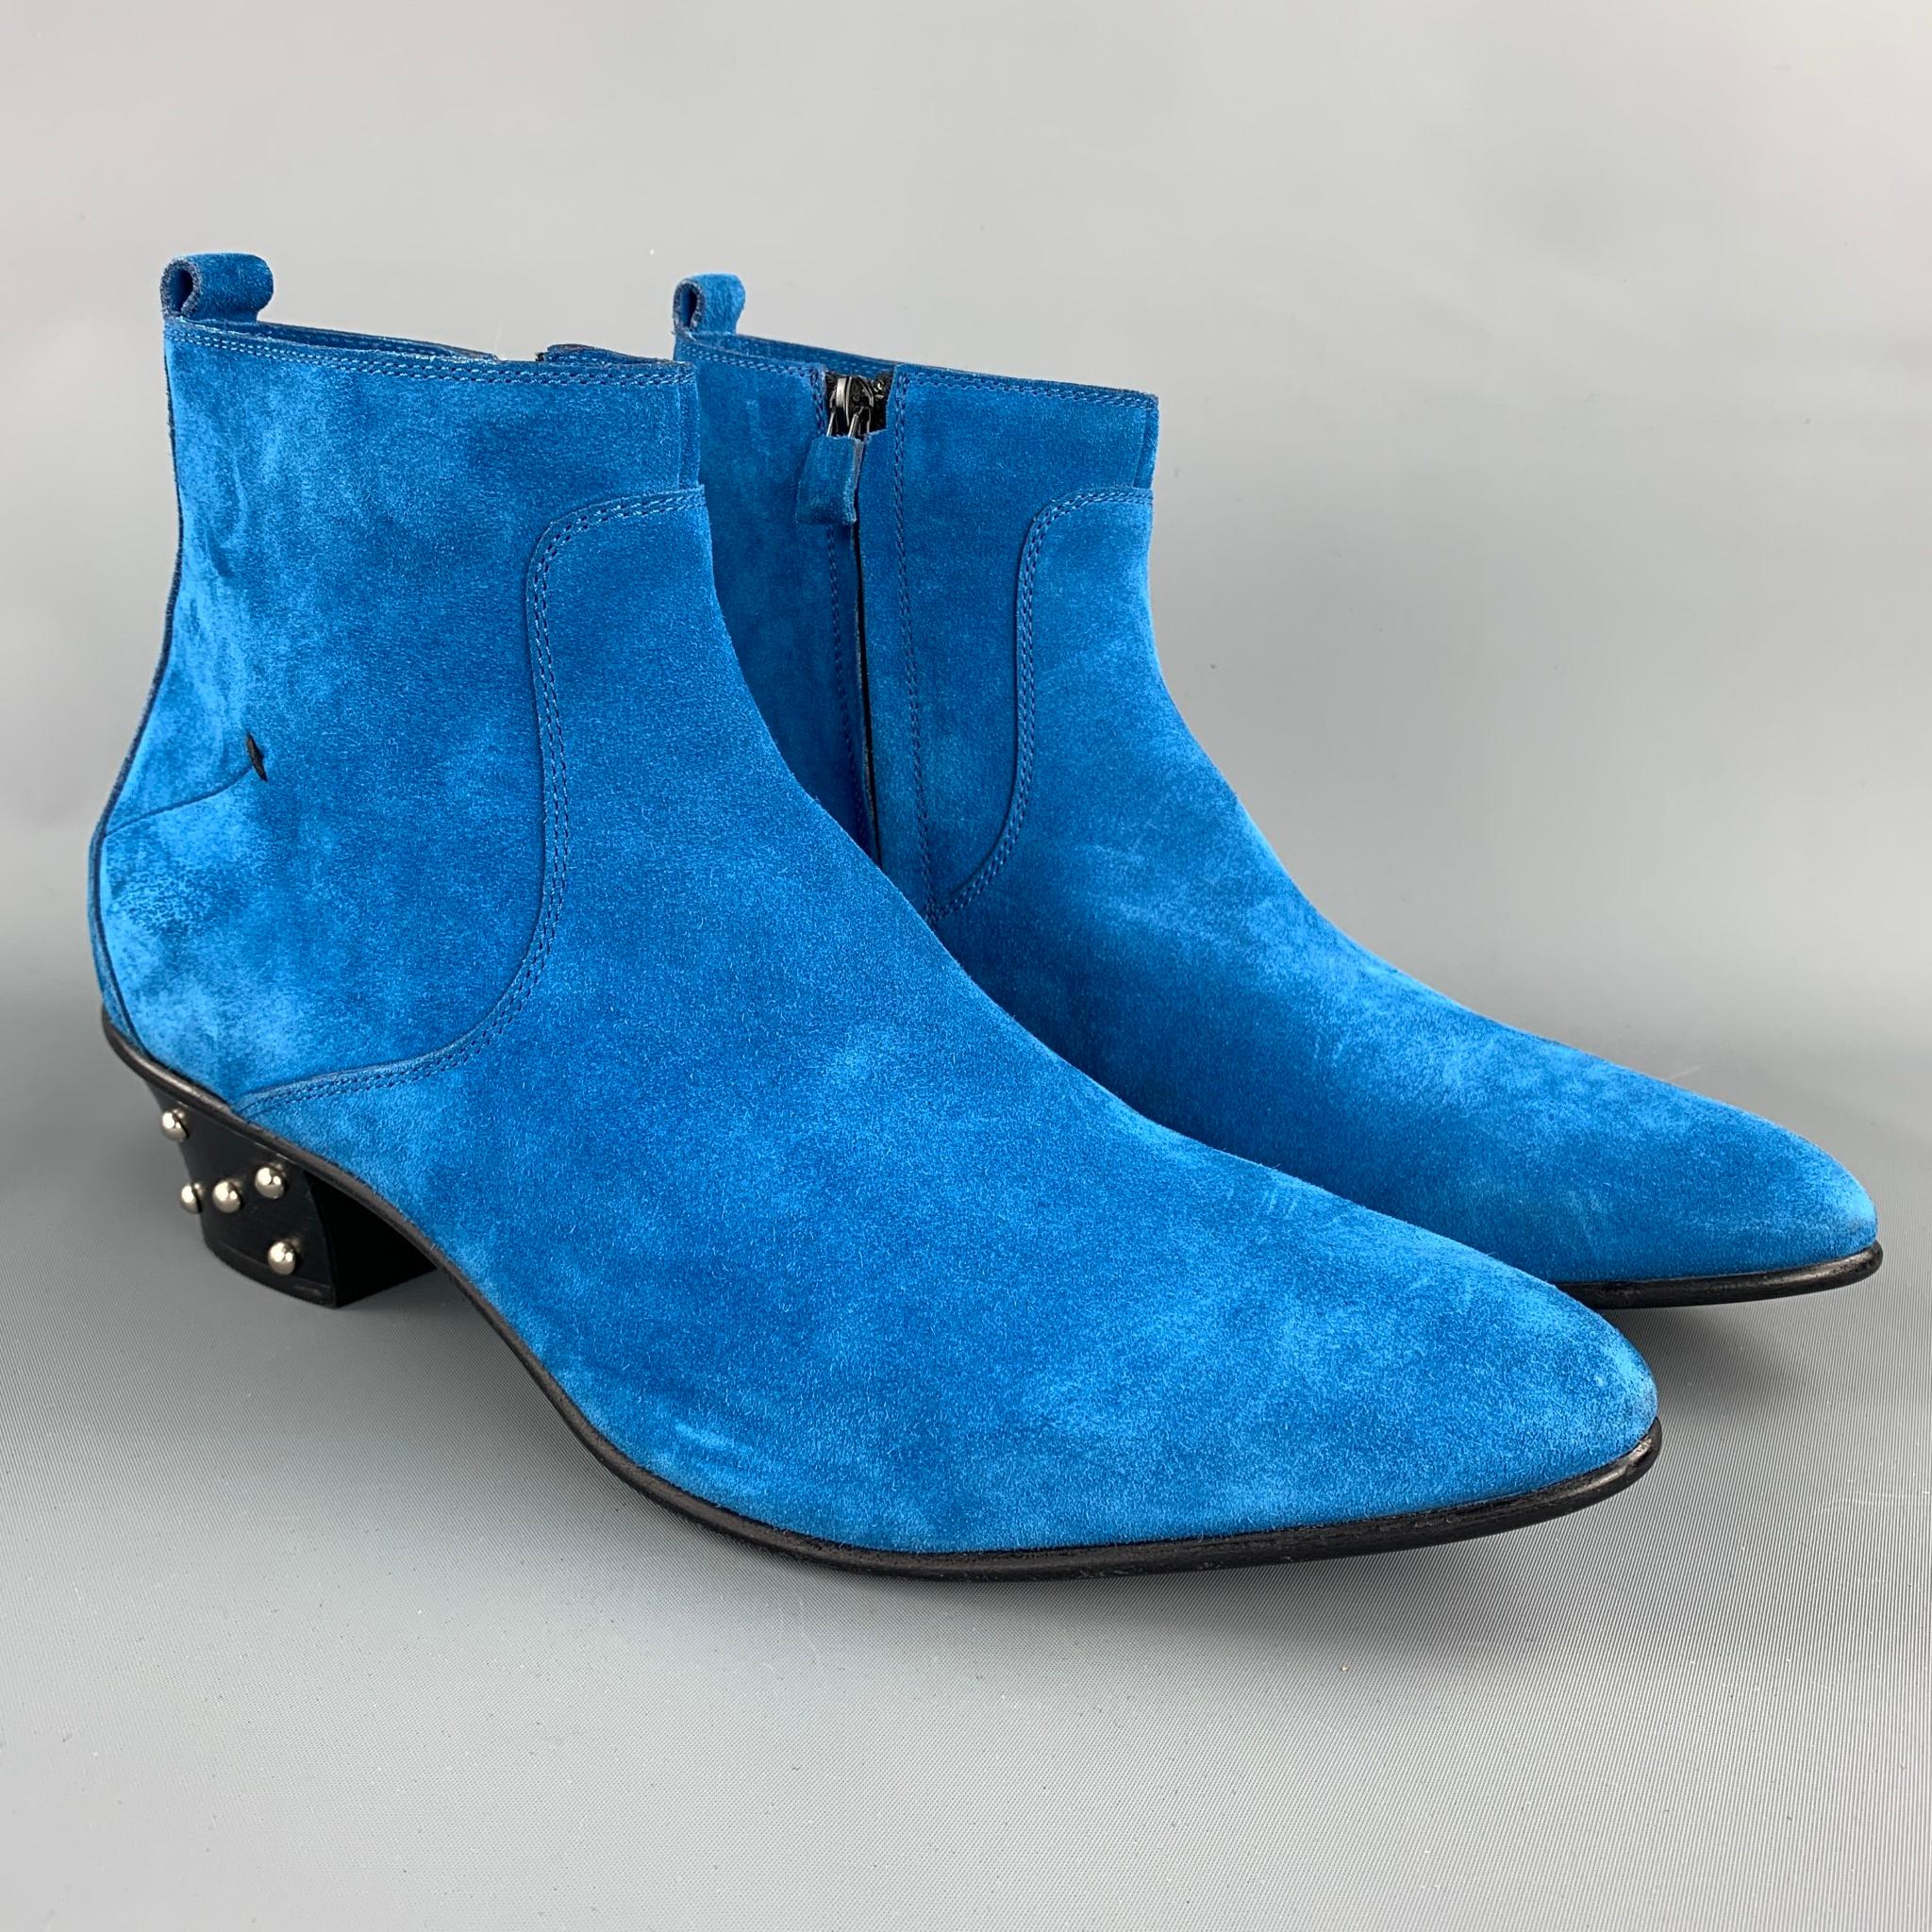 CoSTUME NATIONAL ankle boots comes in a royal blue suede with studded heels featuring a pointed toe, wooden sole, and a side zipper closure. Made in Italy.

New With Tags. 
Marked: 9

Measurements:

Length: 11 in.
Width: 4 in. 
Height: 5 in. 